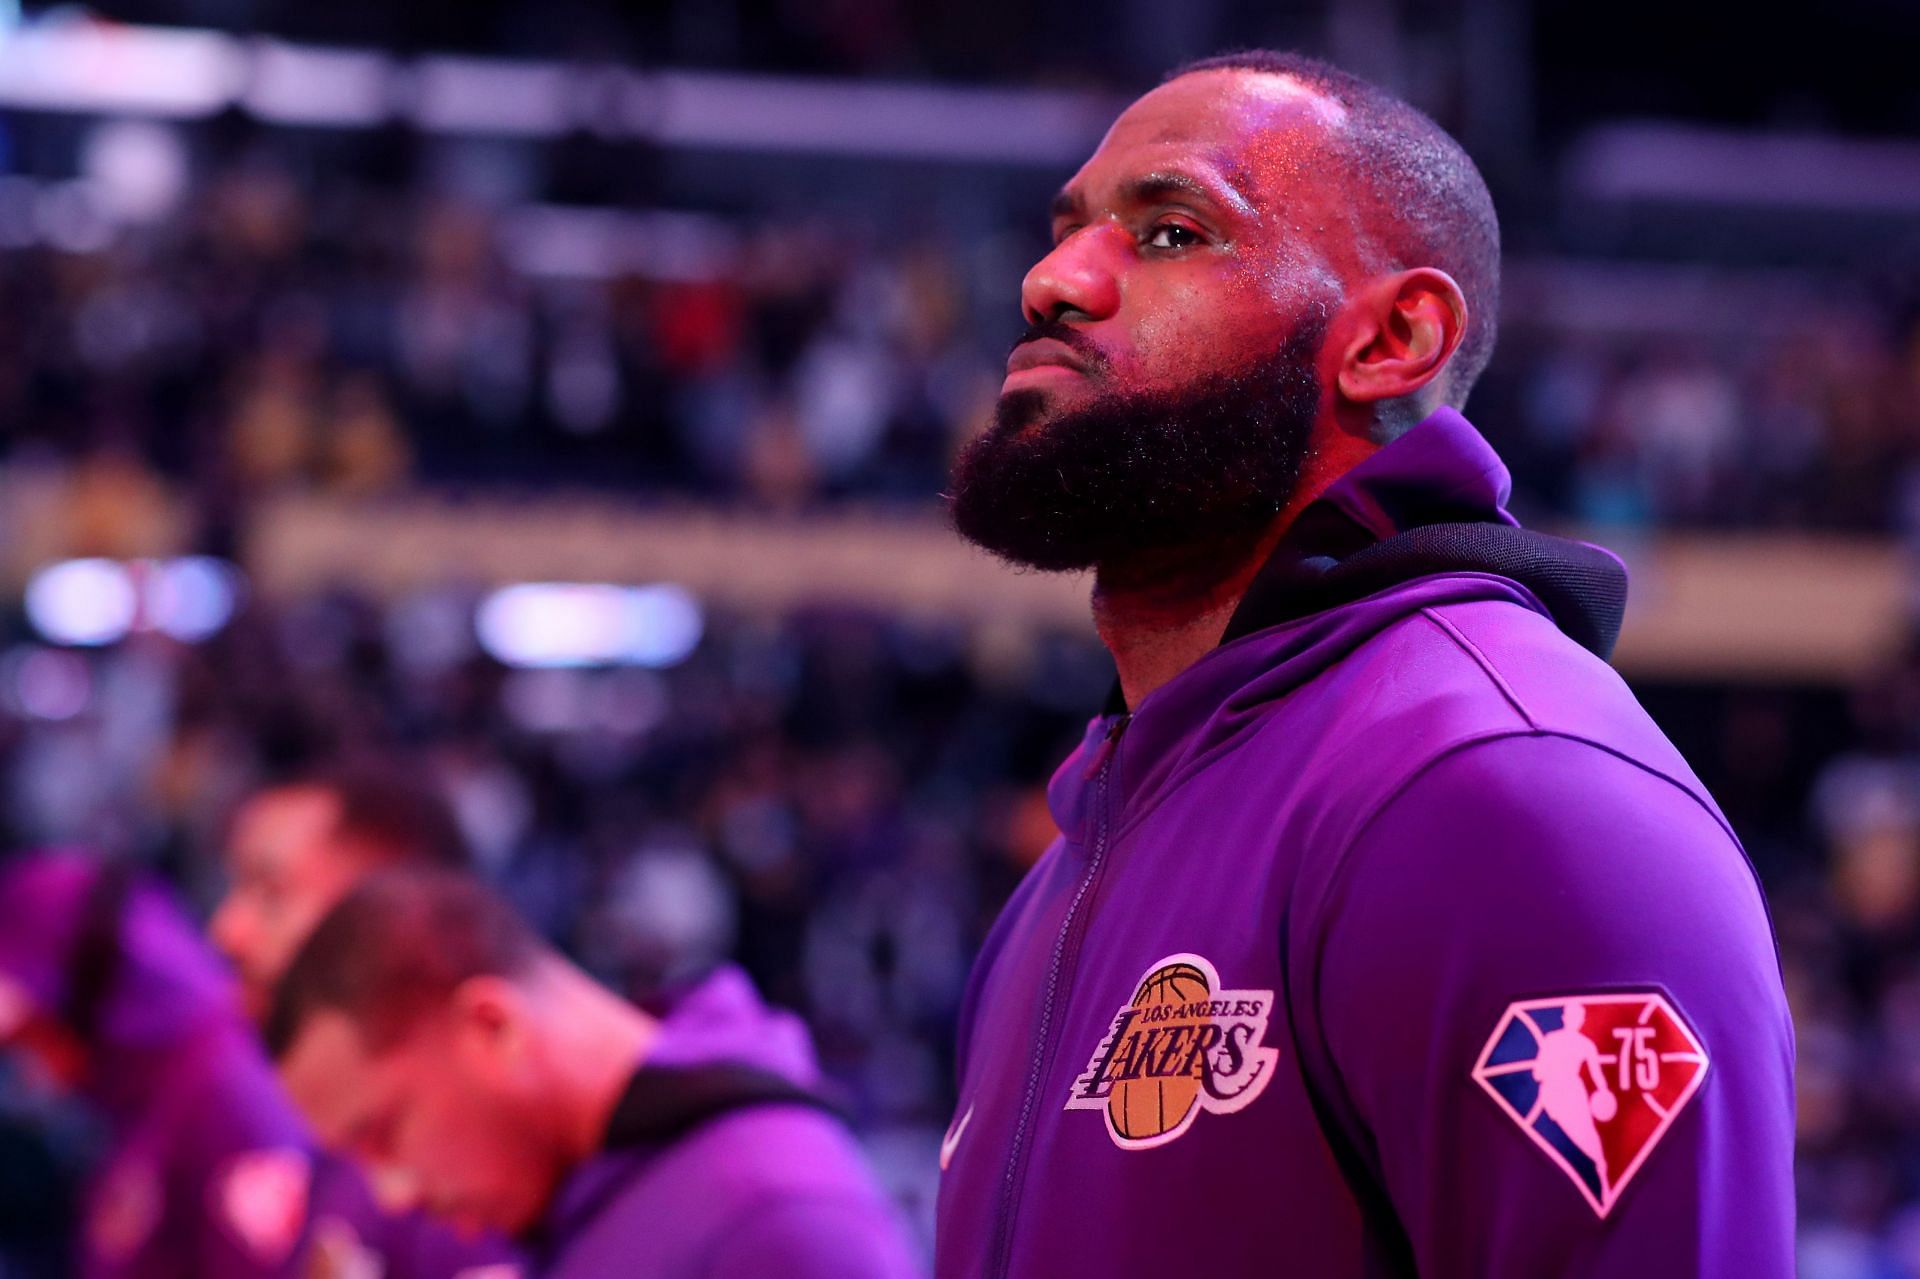 LeBron James #6 of the Los Angeles Lakers looks on during the national anthem before the game against the Minnesota Timberwolves at Crypto.com Arena on January 02, 2022 in Los Angeles, California.